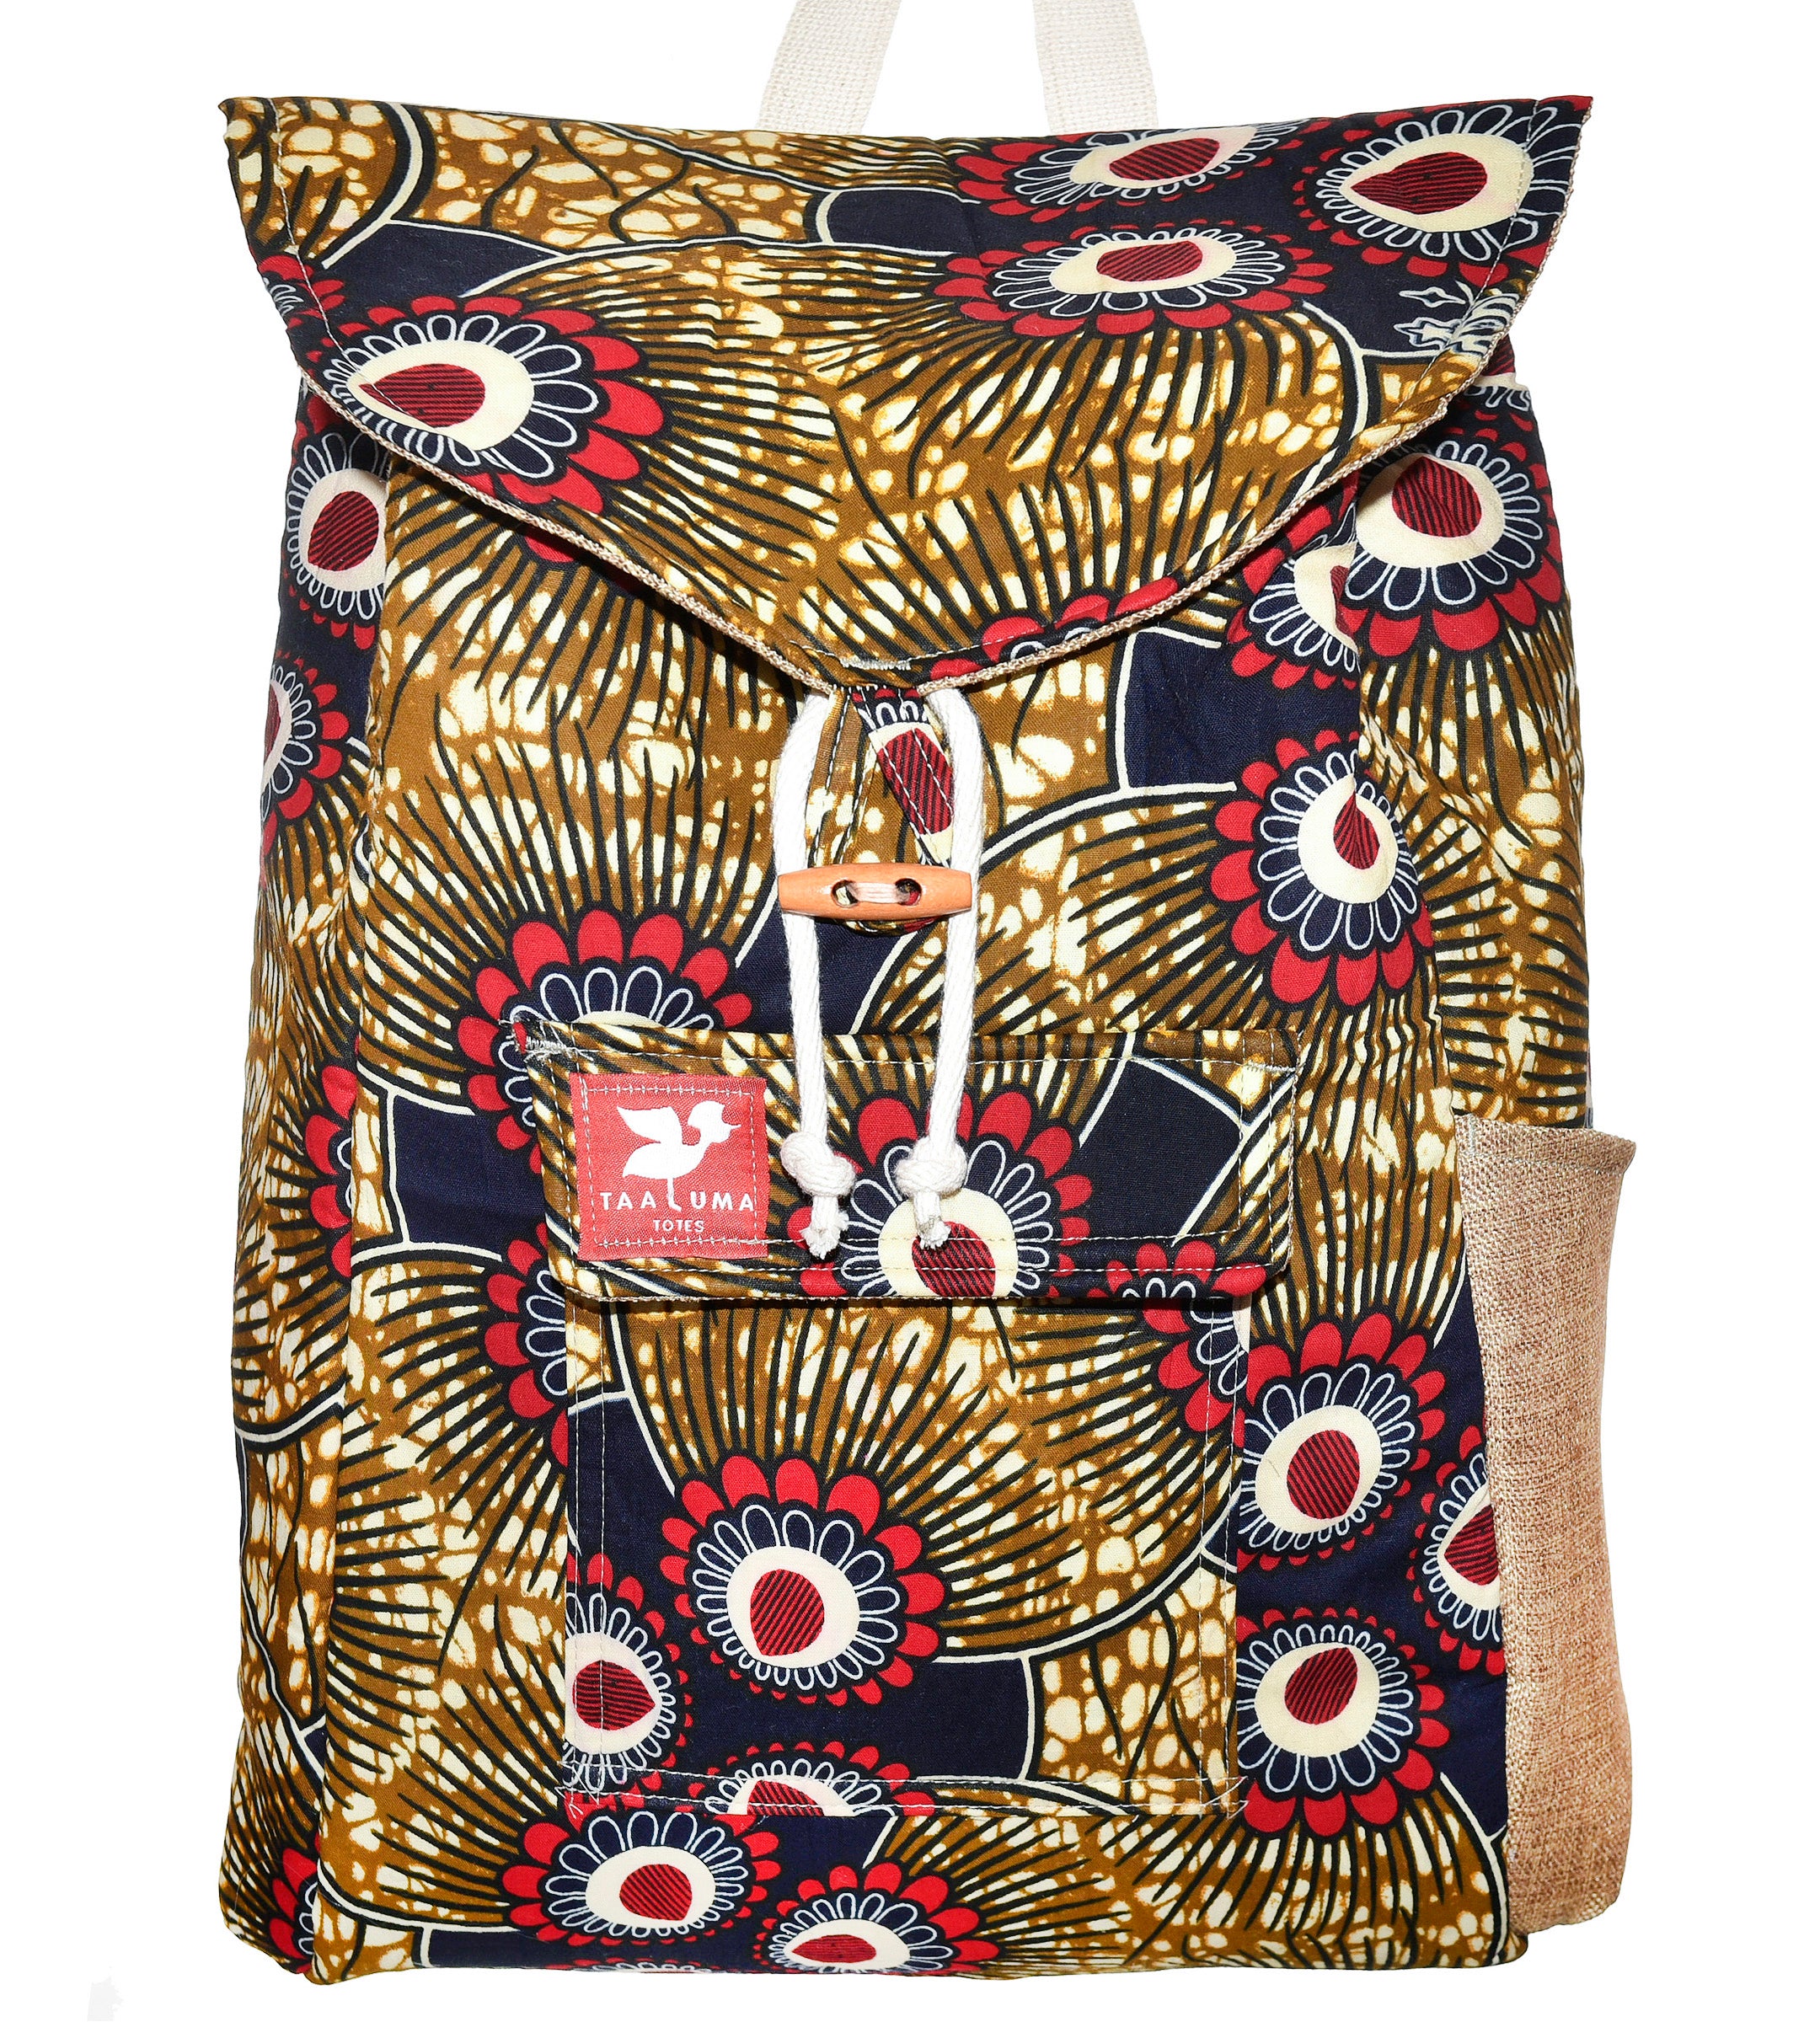 Democratic Republic of Congo Tote (by Kayla Griffith)